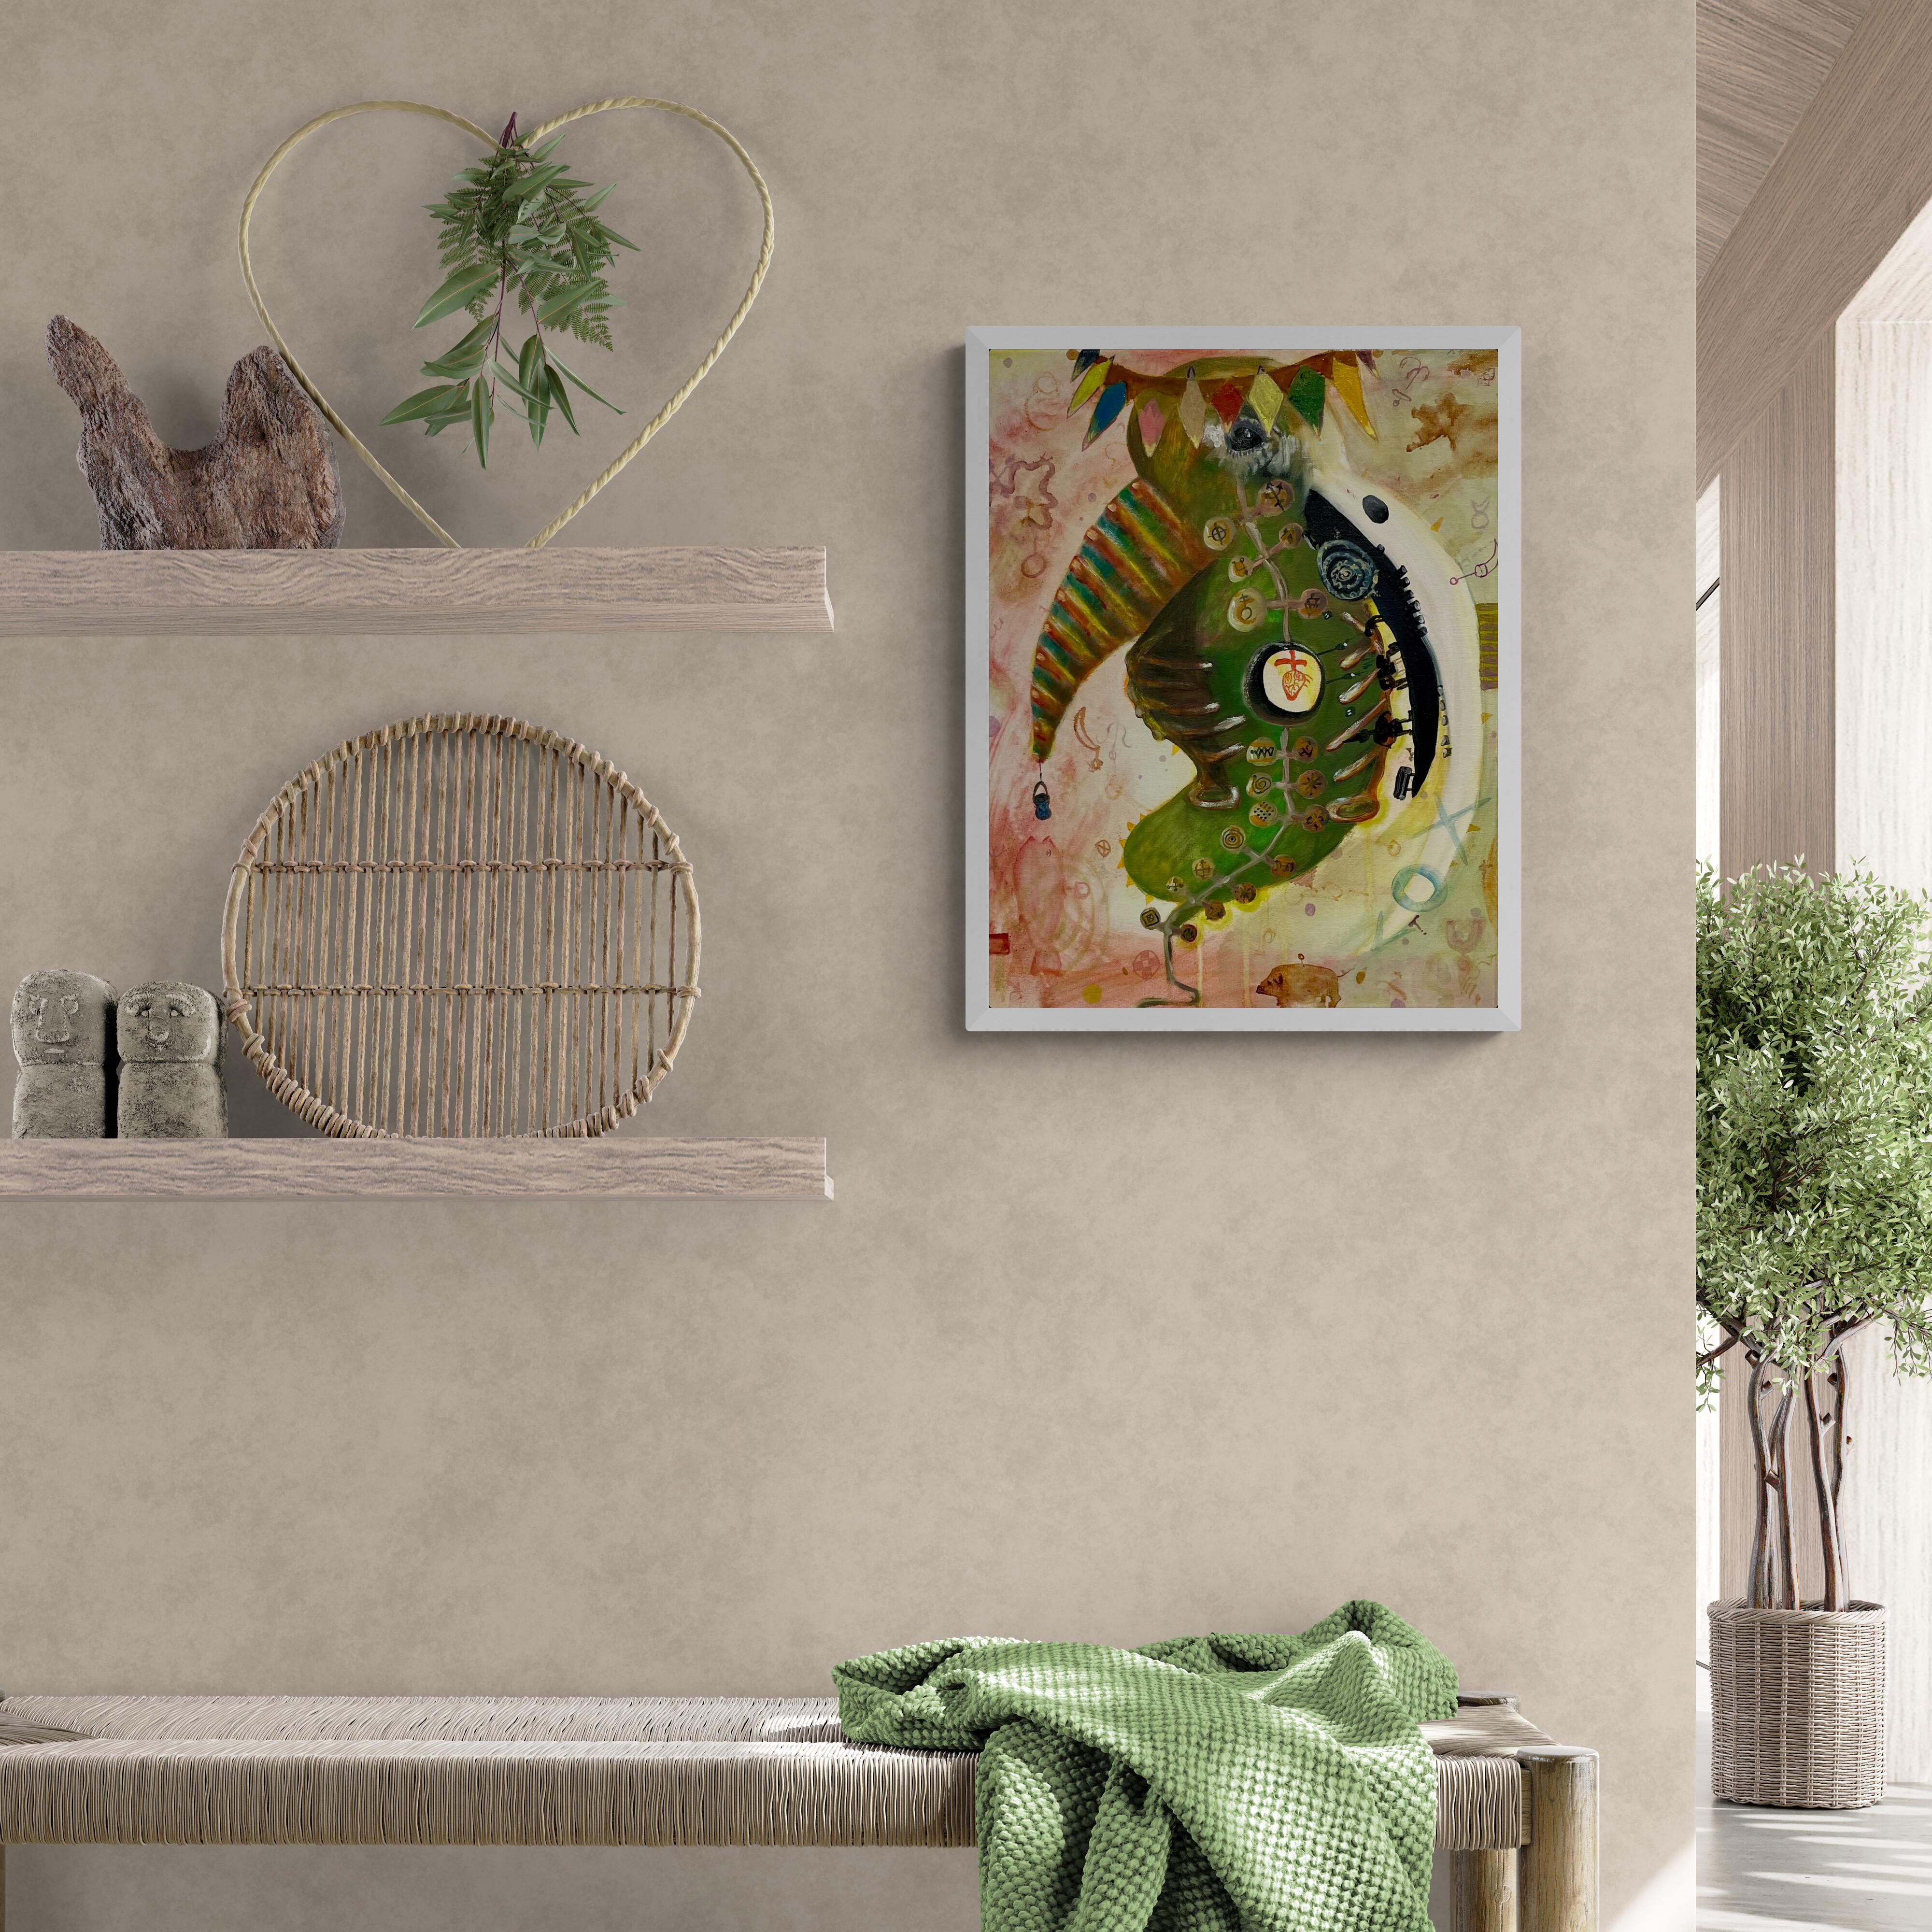 Joseph Broghammer
Luck Memory (Hummingbird, Portrait, Storytelling, Oil Painting)
Oil on Canvas
Year: 2023
Size: 21x17in
Signed by hand
COA provided
Ref.: 924802-1897

*Framed - ready to hang
** Framed in a black wooden frame

Tags: Oil Painting,